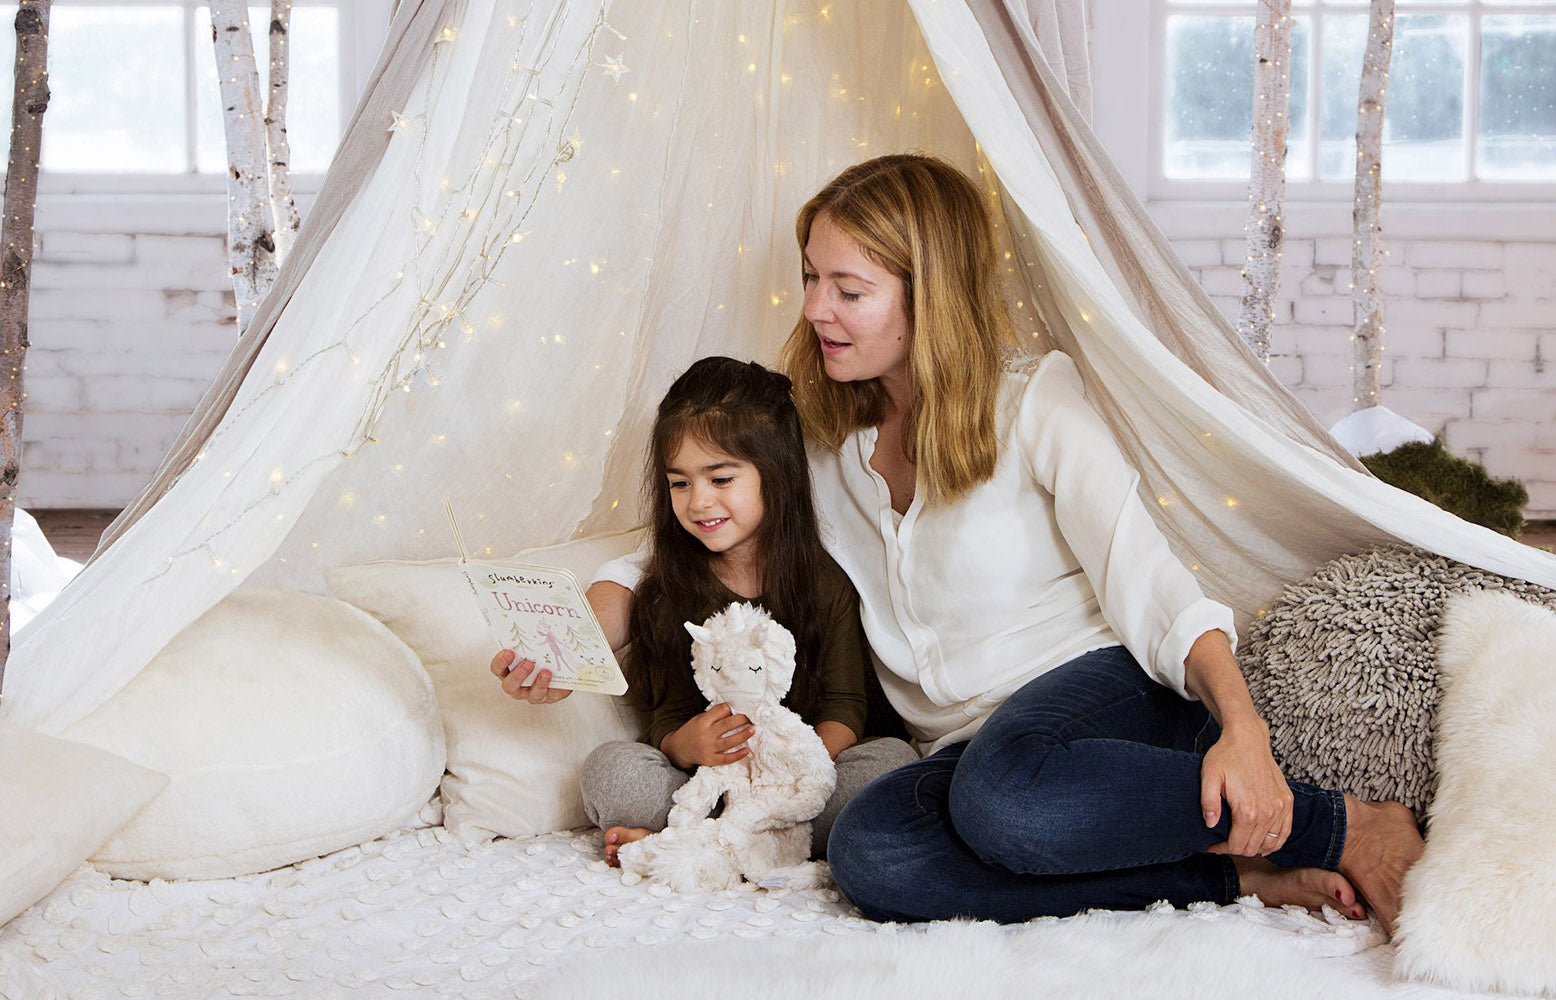 Mom and daughter reading a book in a winter wonderland